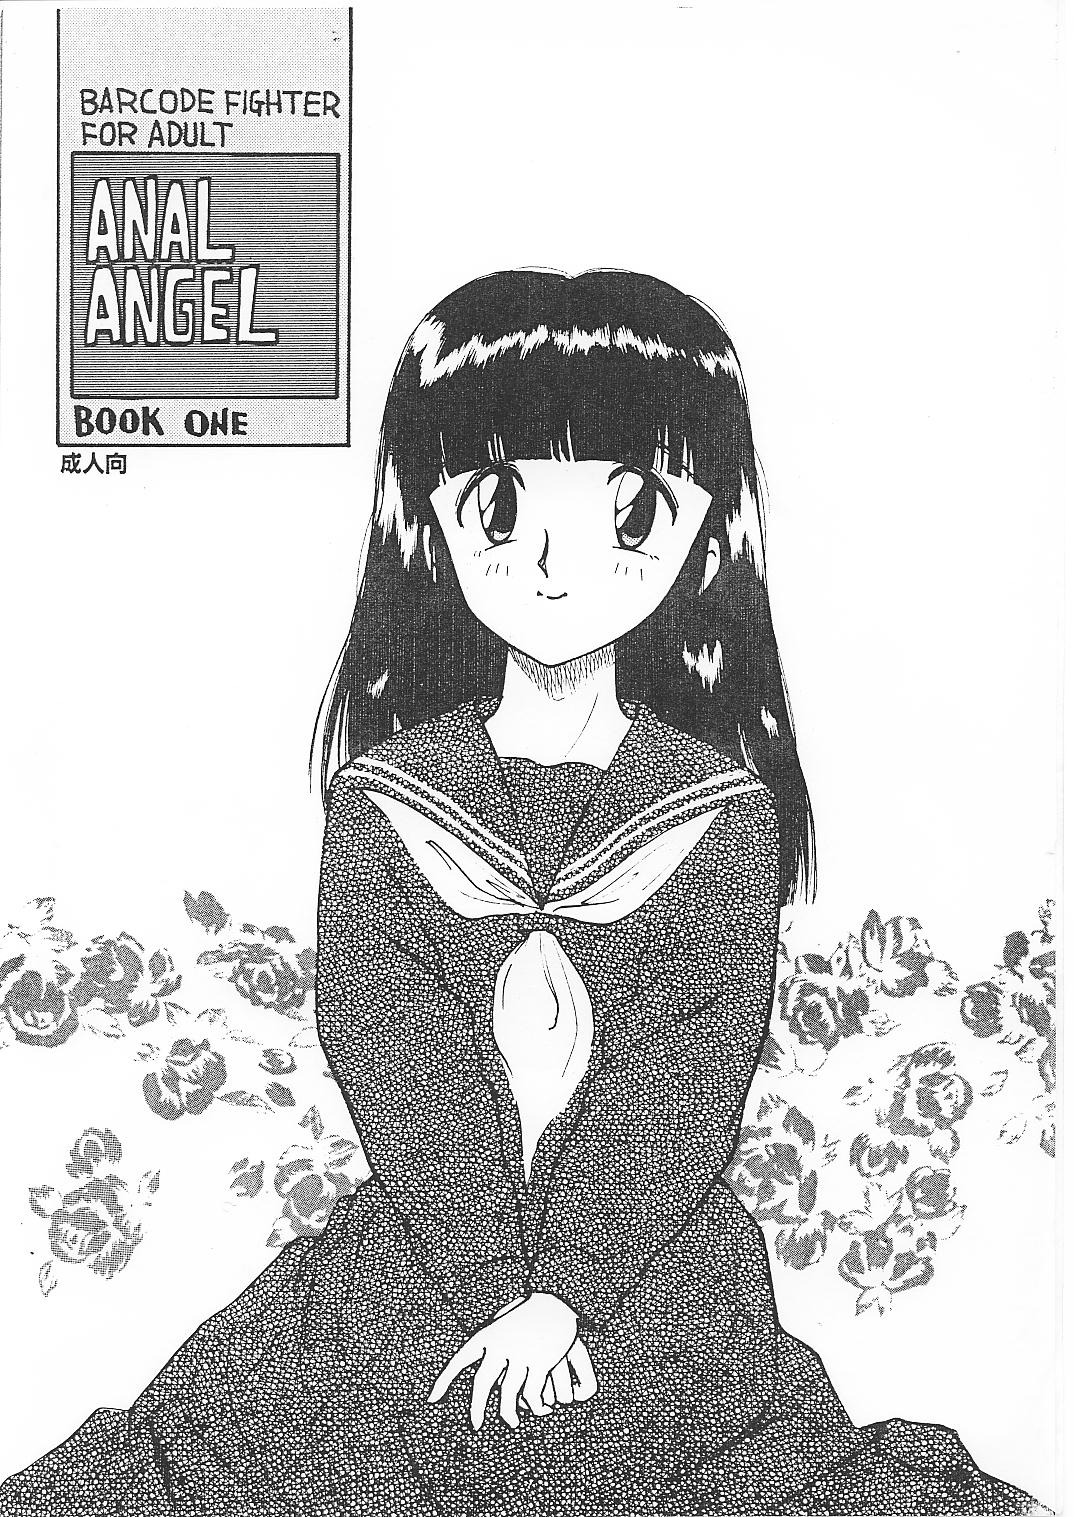 (CR19) [GAME DOME (Kamirenjaku Sanpei)] ANAL ANGEL (Barcode Fighter) page 1 full